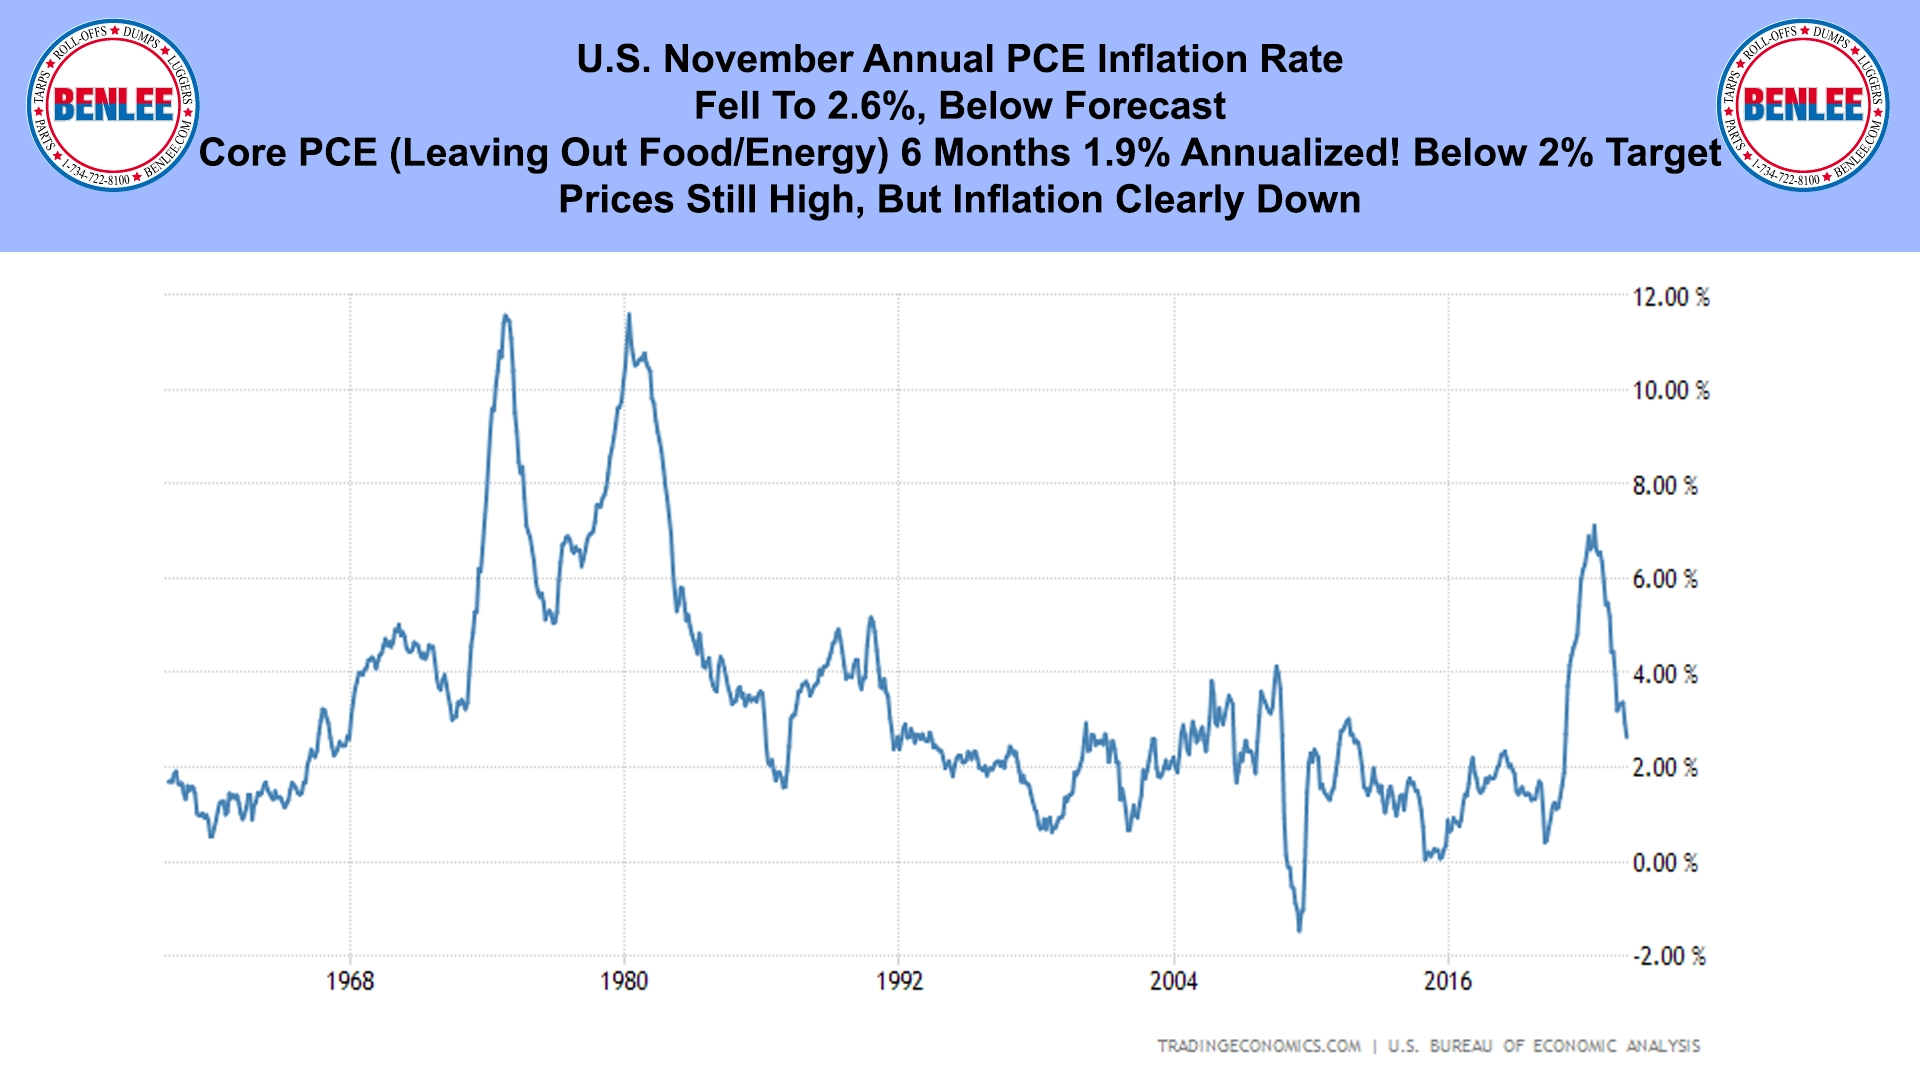 U.S. November Annual PCE Inflation Rate